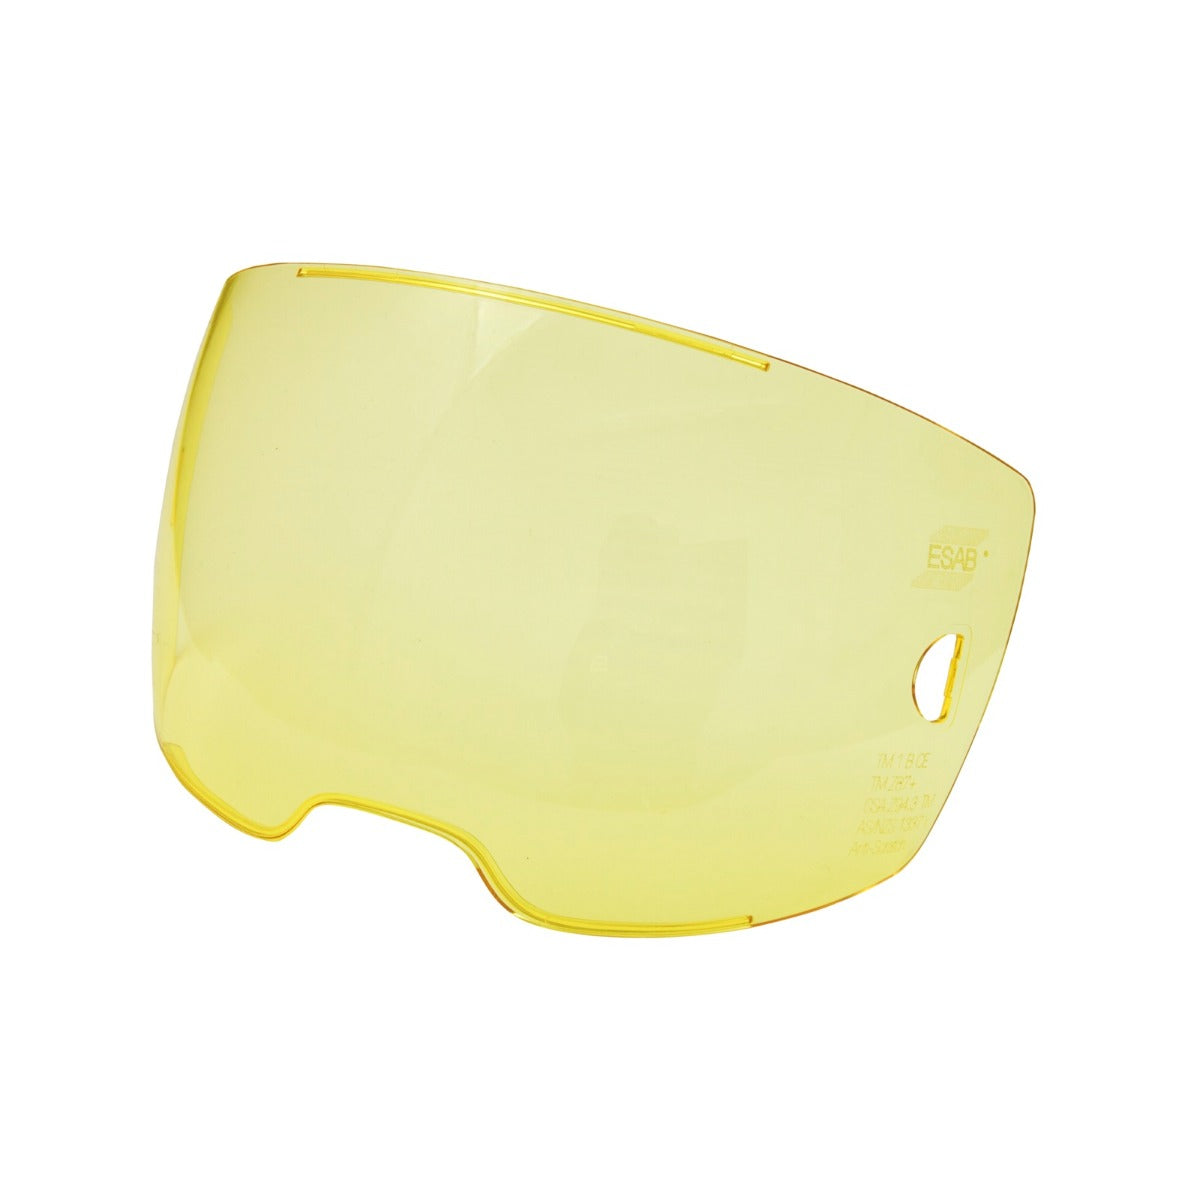 ESAB Sentinel A60 Amber Outside Cover Lens - Pkg of 2 (0700600881)